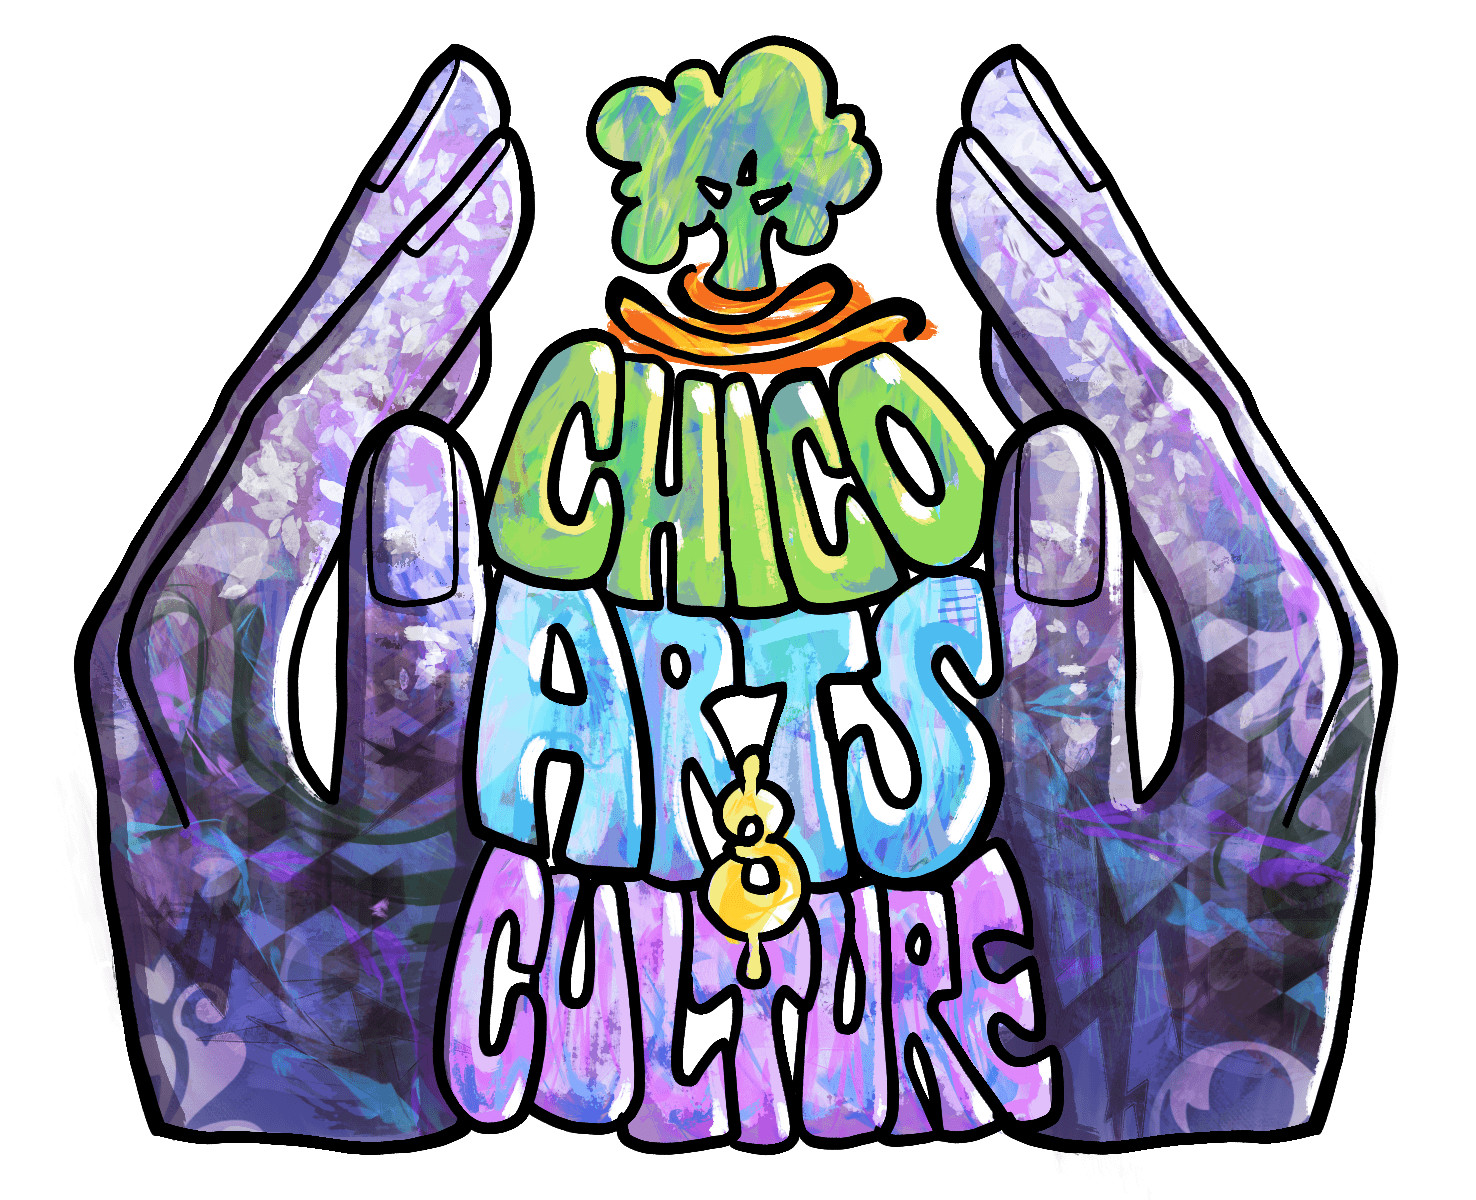 Illustration of the Our Hands sculpture surrounding the words "Chico Arts and Culture" in a stylized text. 